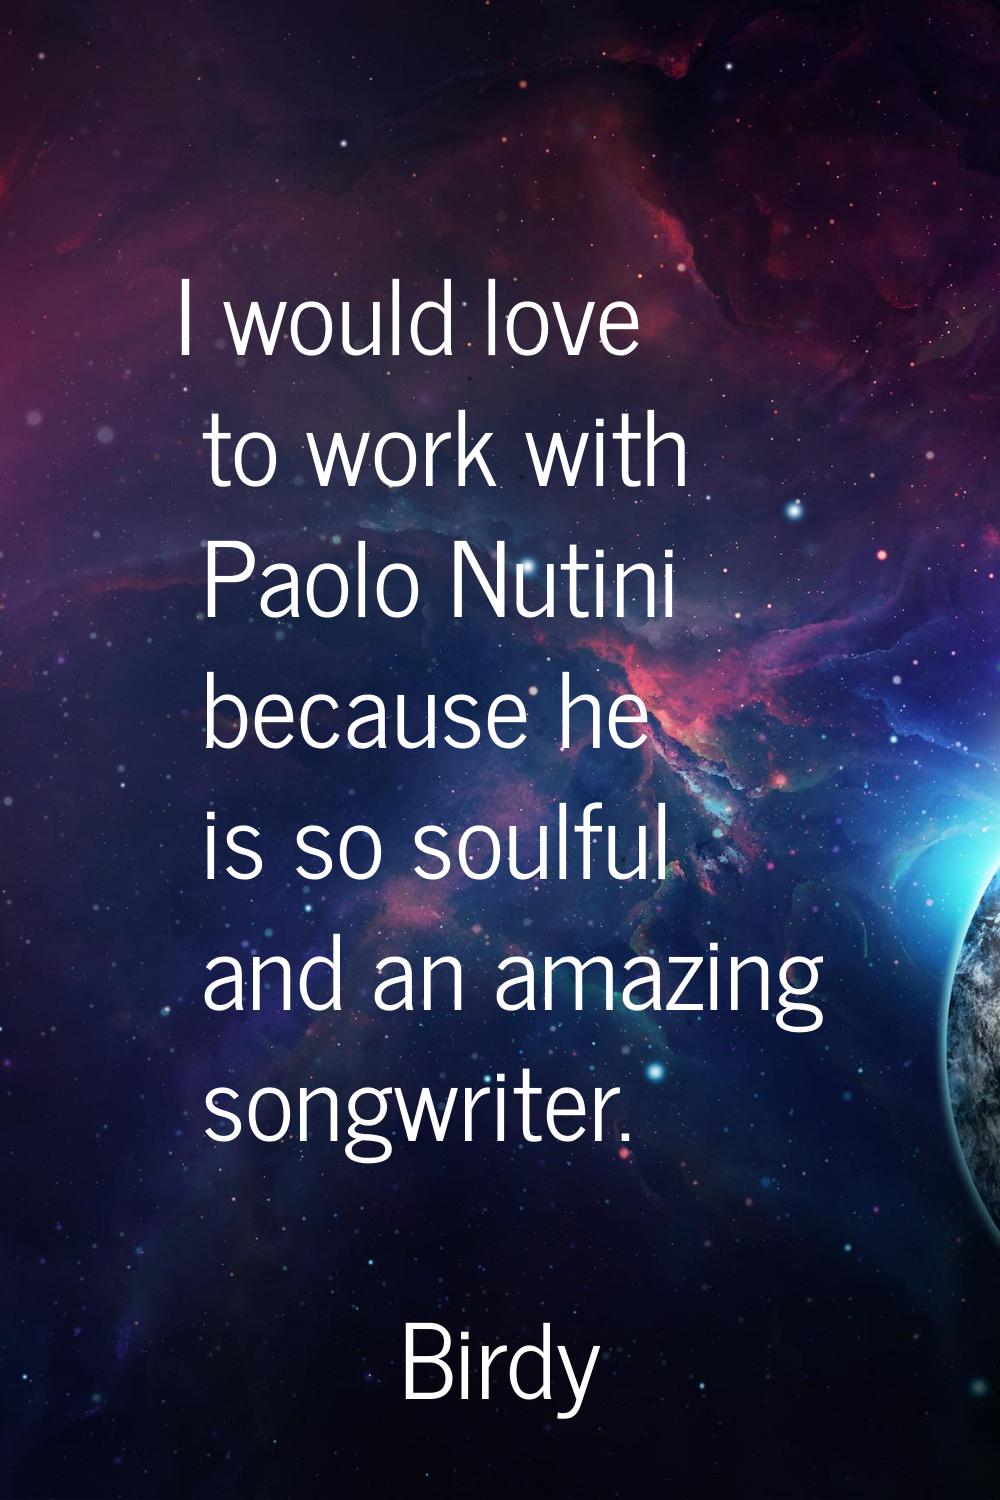 I would love to work with Paolo Nutini because he is so soulful and an amazing songwriter.